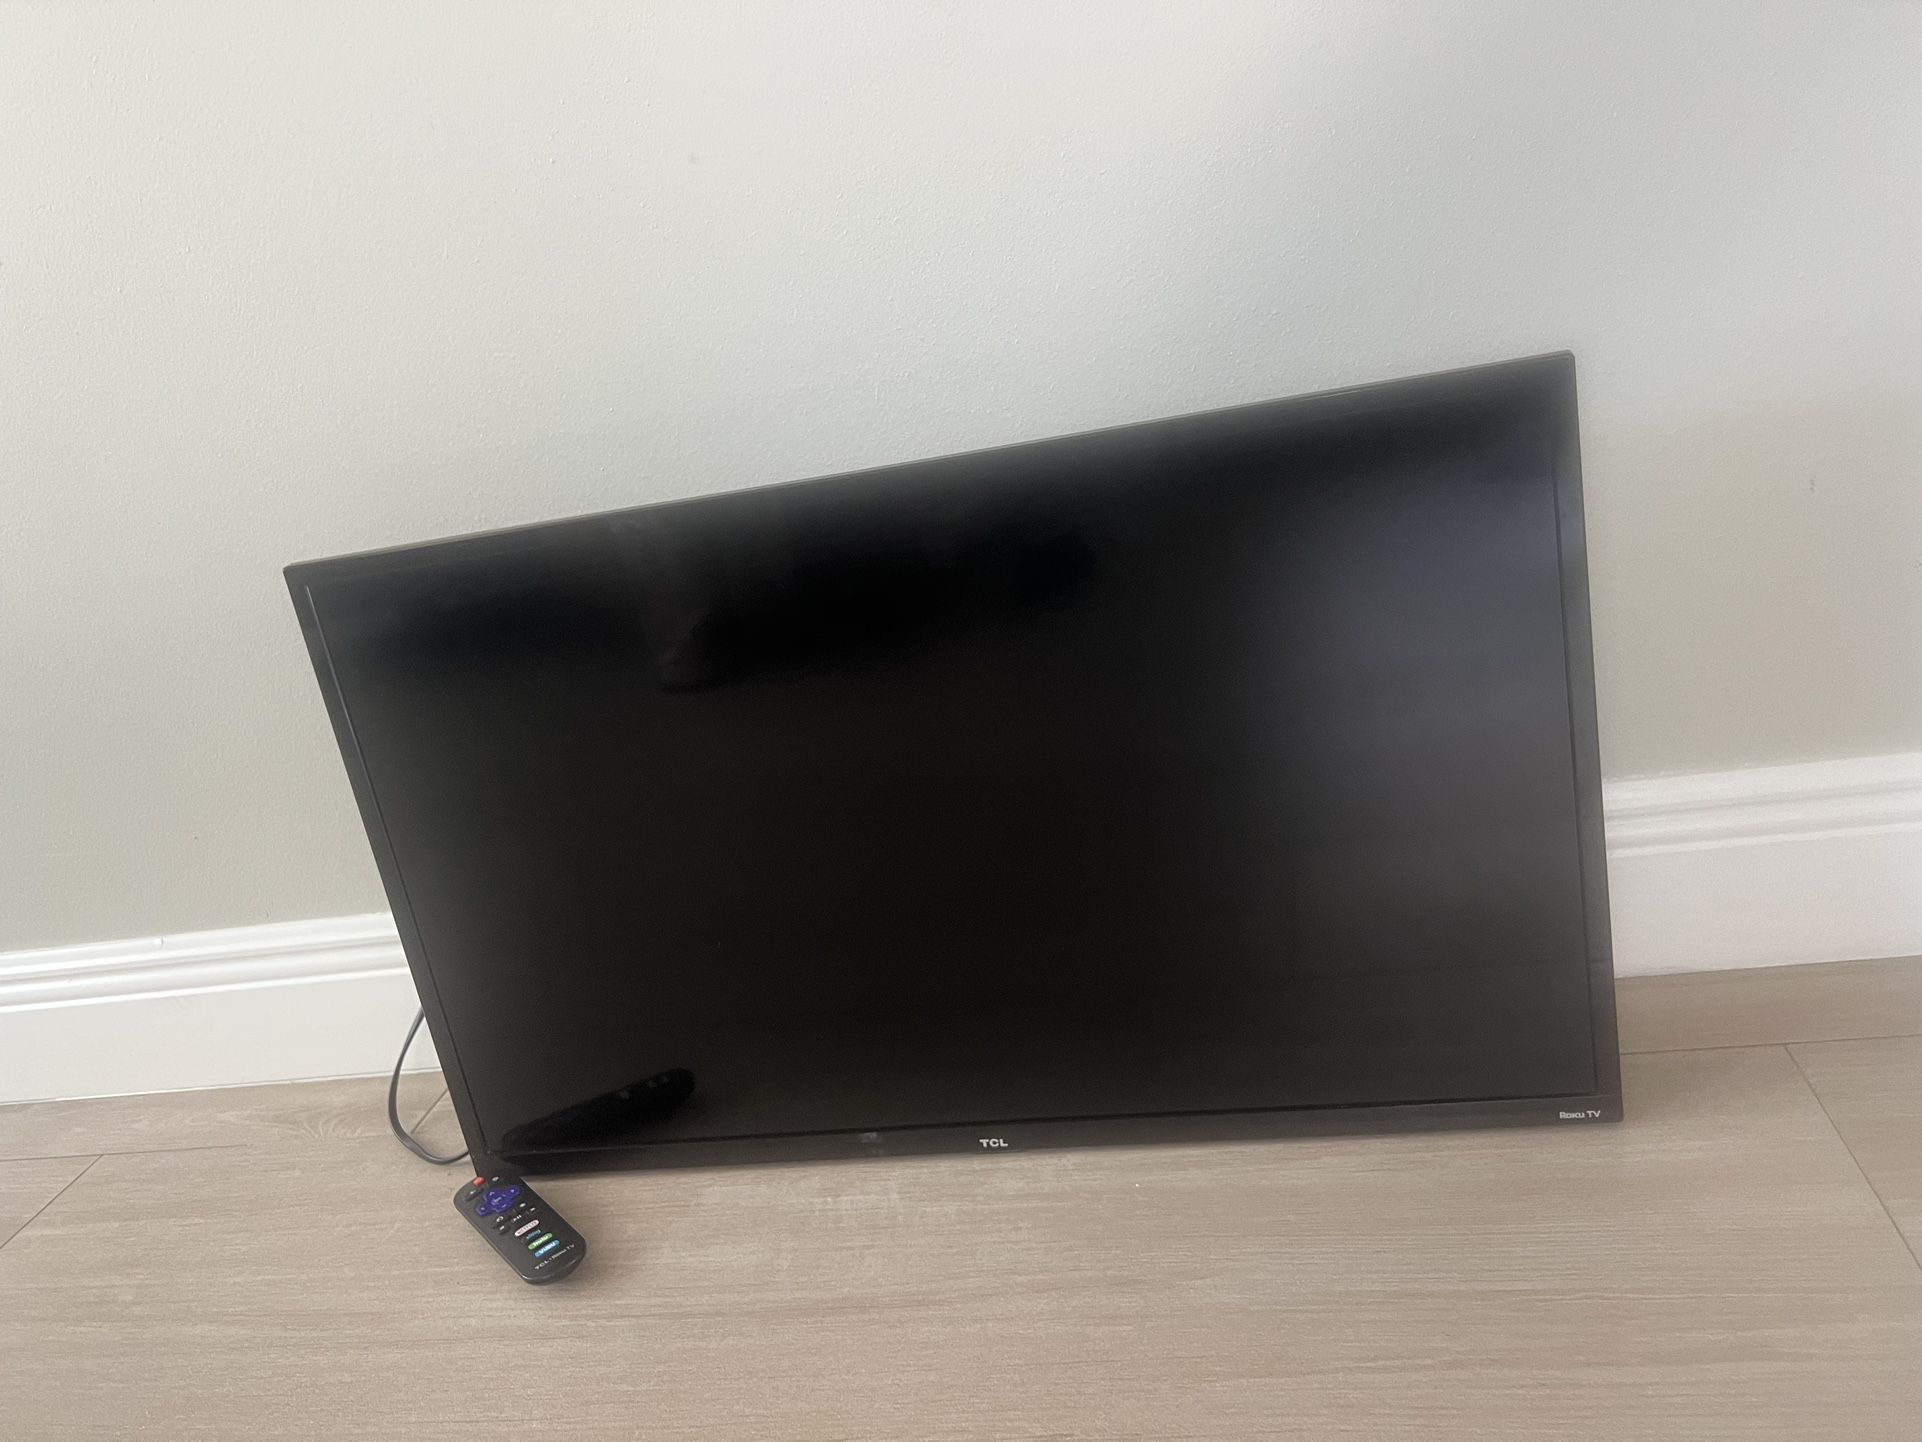 TCL 32 inch tv with control